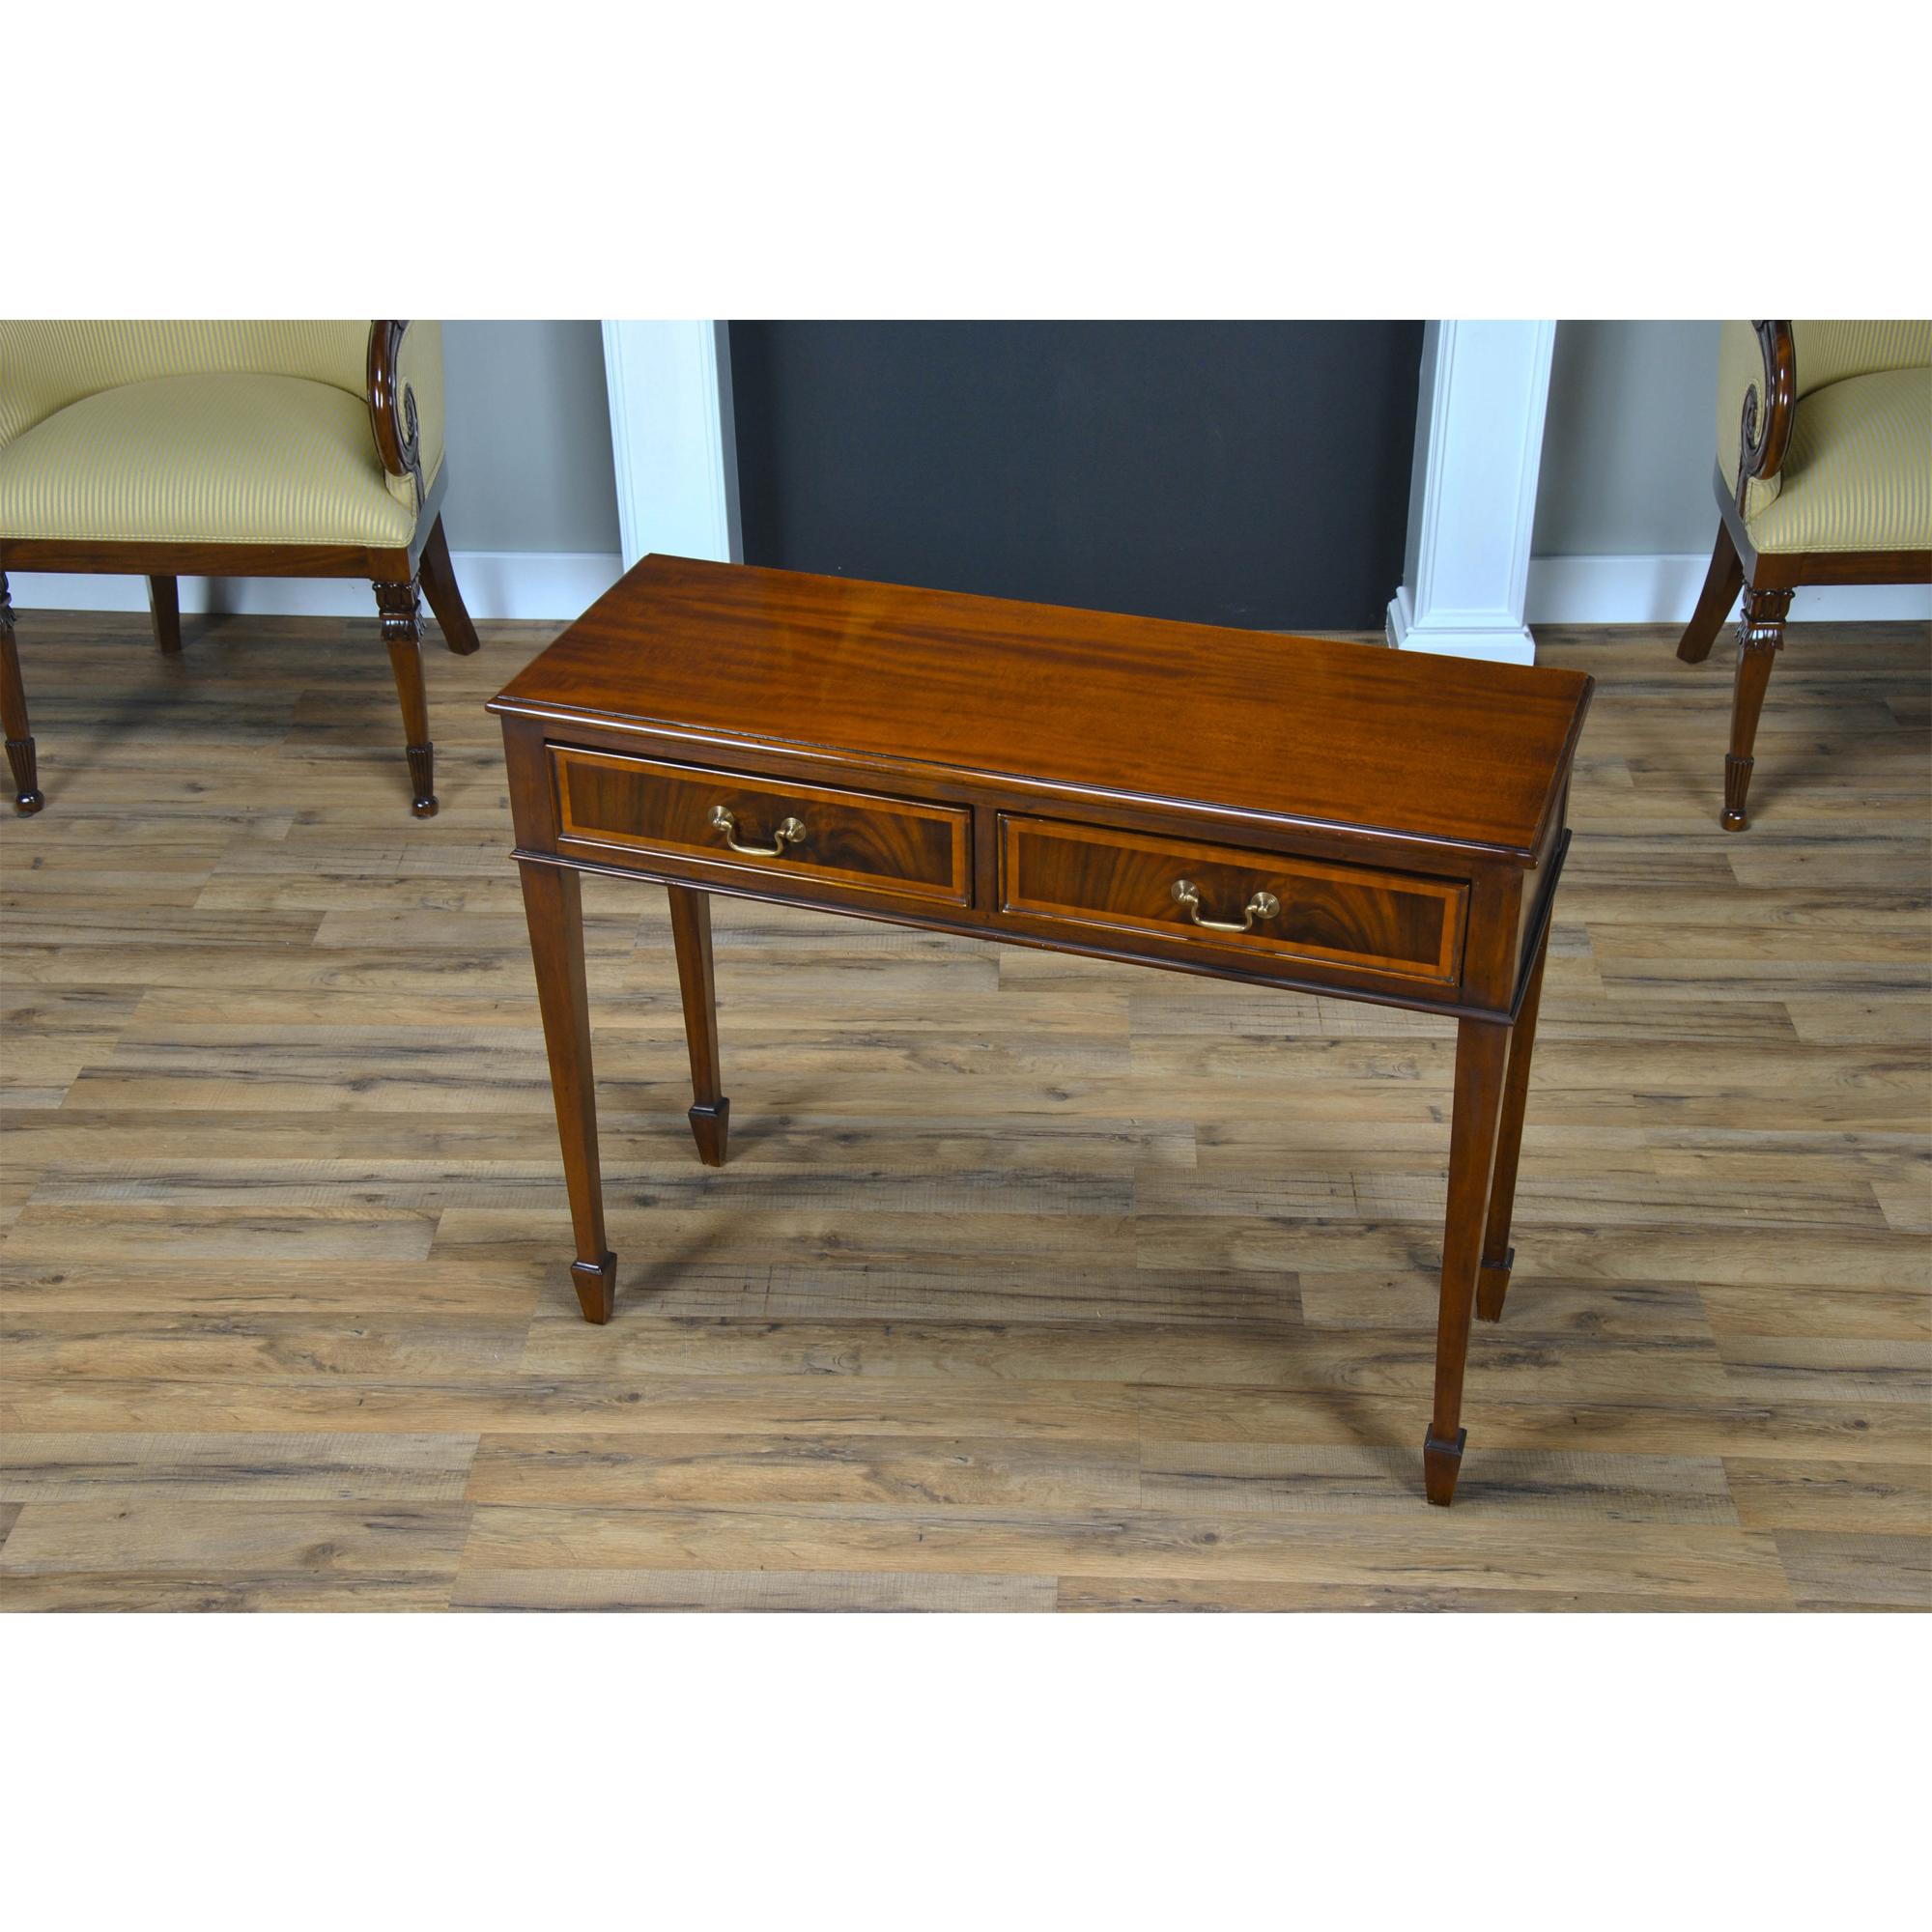 A high quality Small Mahogany Banded Console made of mahogany and satinwood with solid brass drawer pulls. The two dovetailed drawers denote high quality construction and the elegant tapered legs end in a popular spade foot design. A popular piece